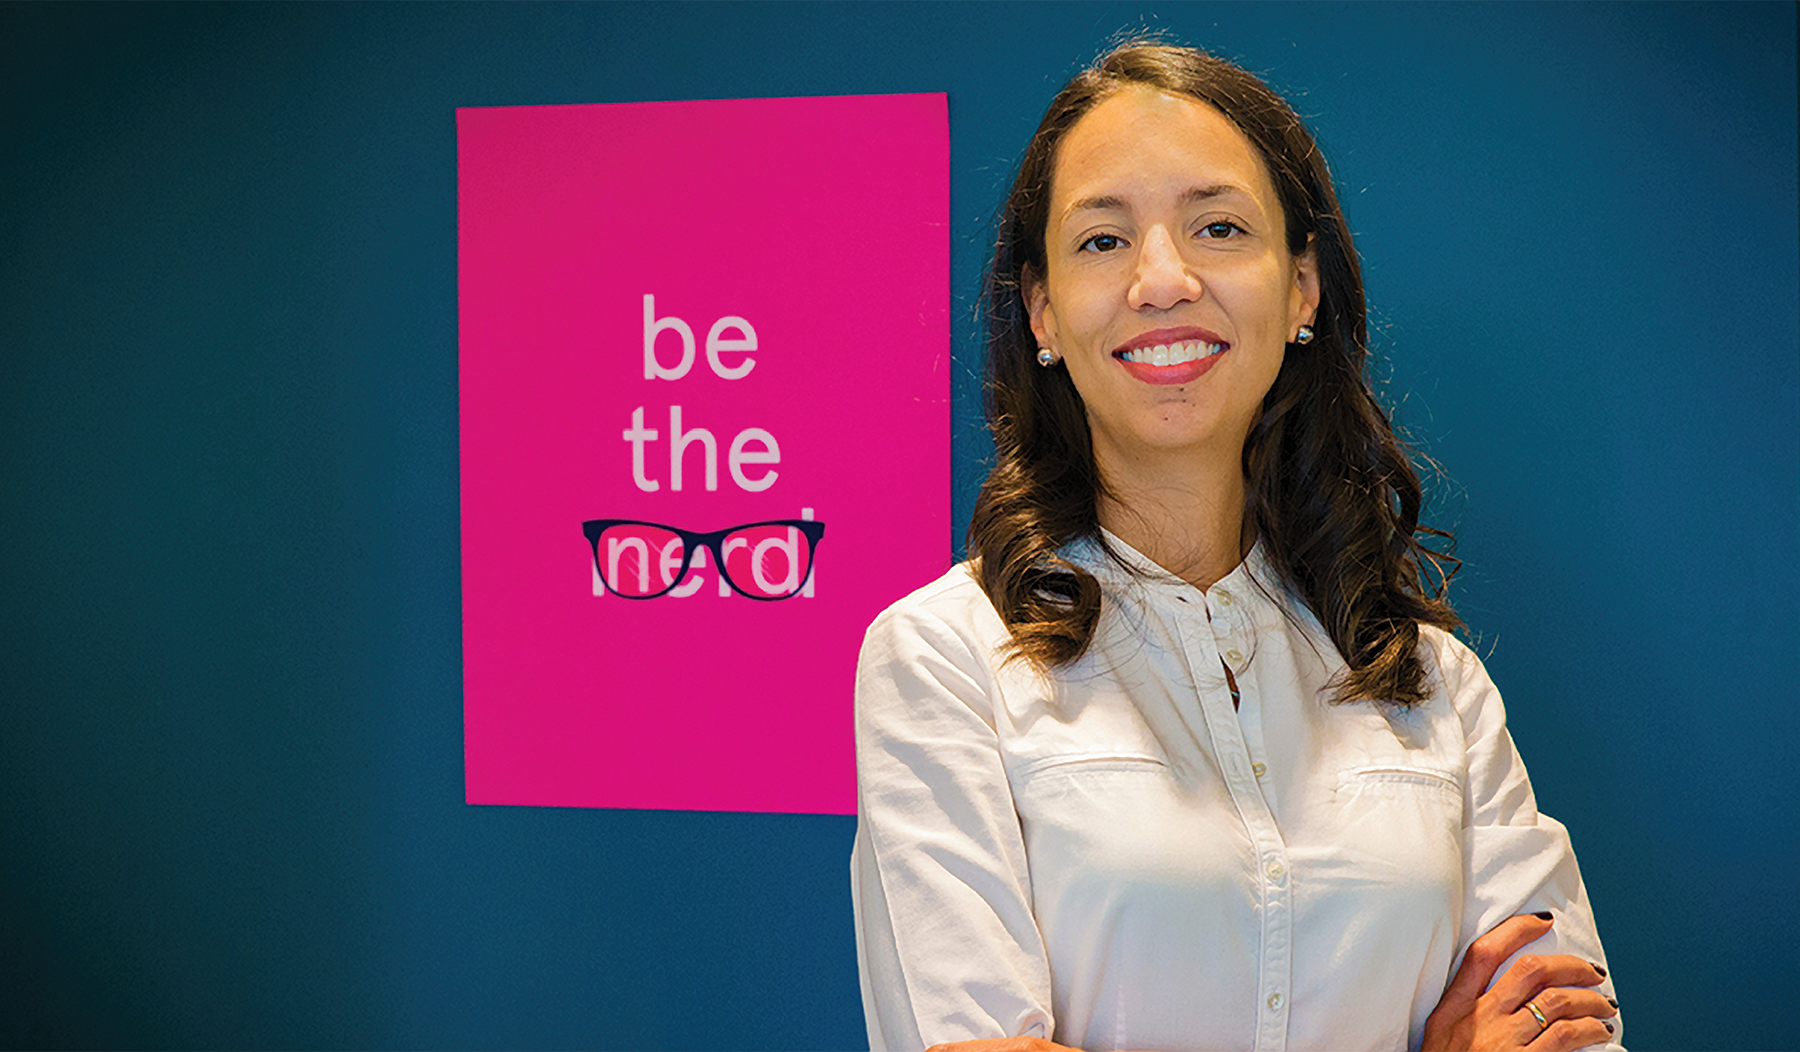 A photo of a smiling woman in front of a pink sign that says, "be the nerd."